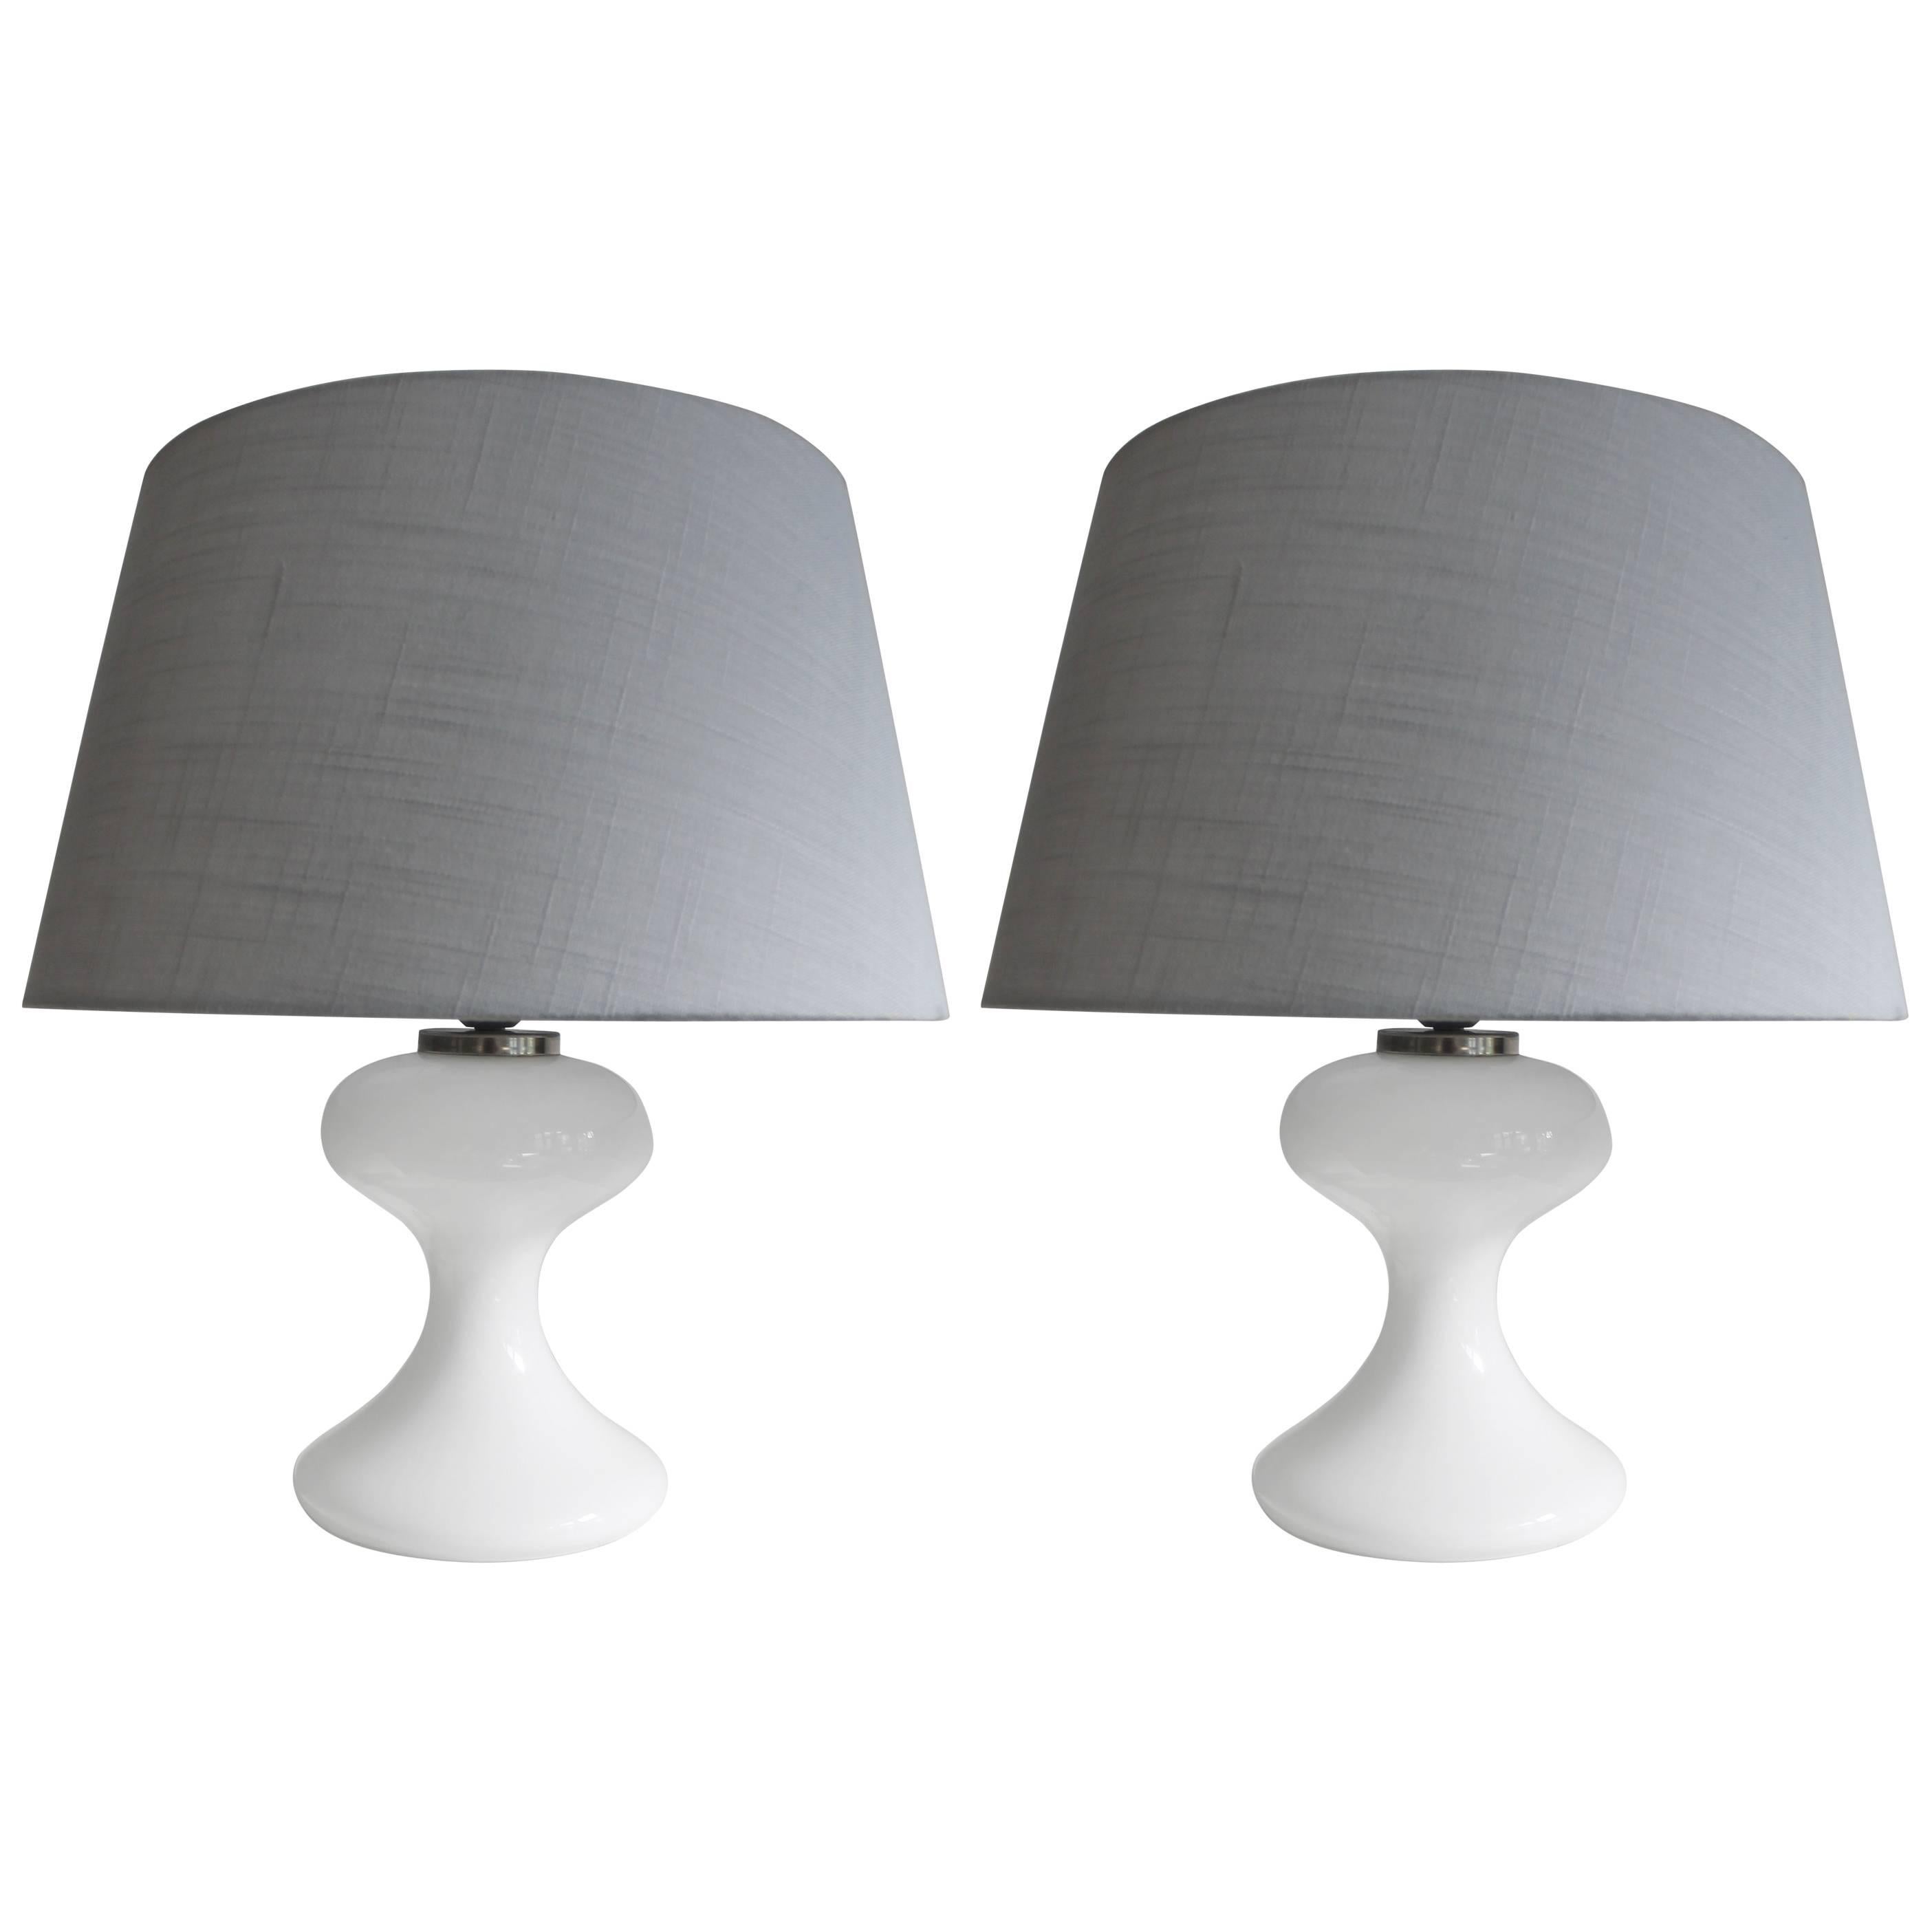 Pair of Ingo Maurer Table Lamps, Germany, 1970s